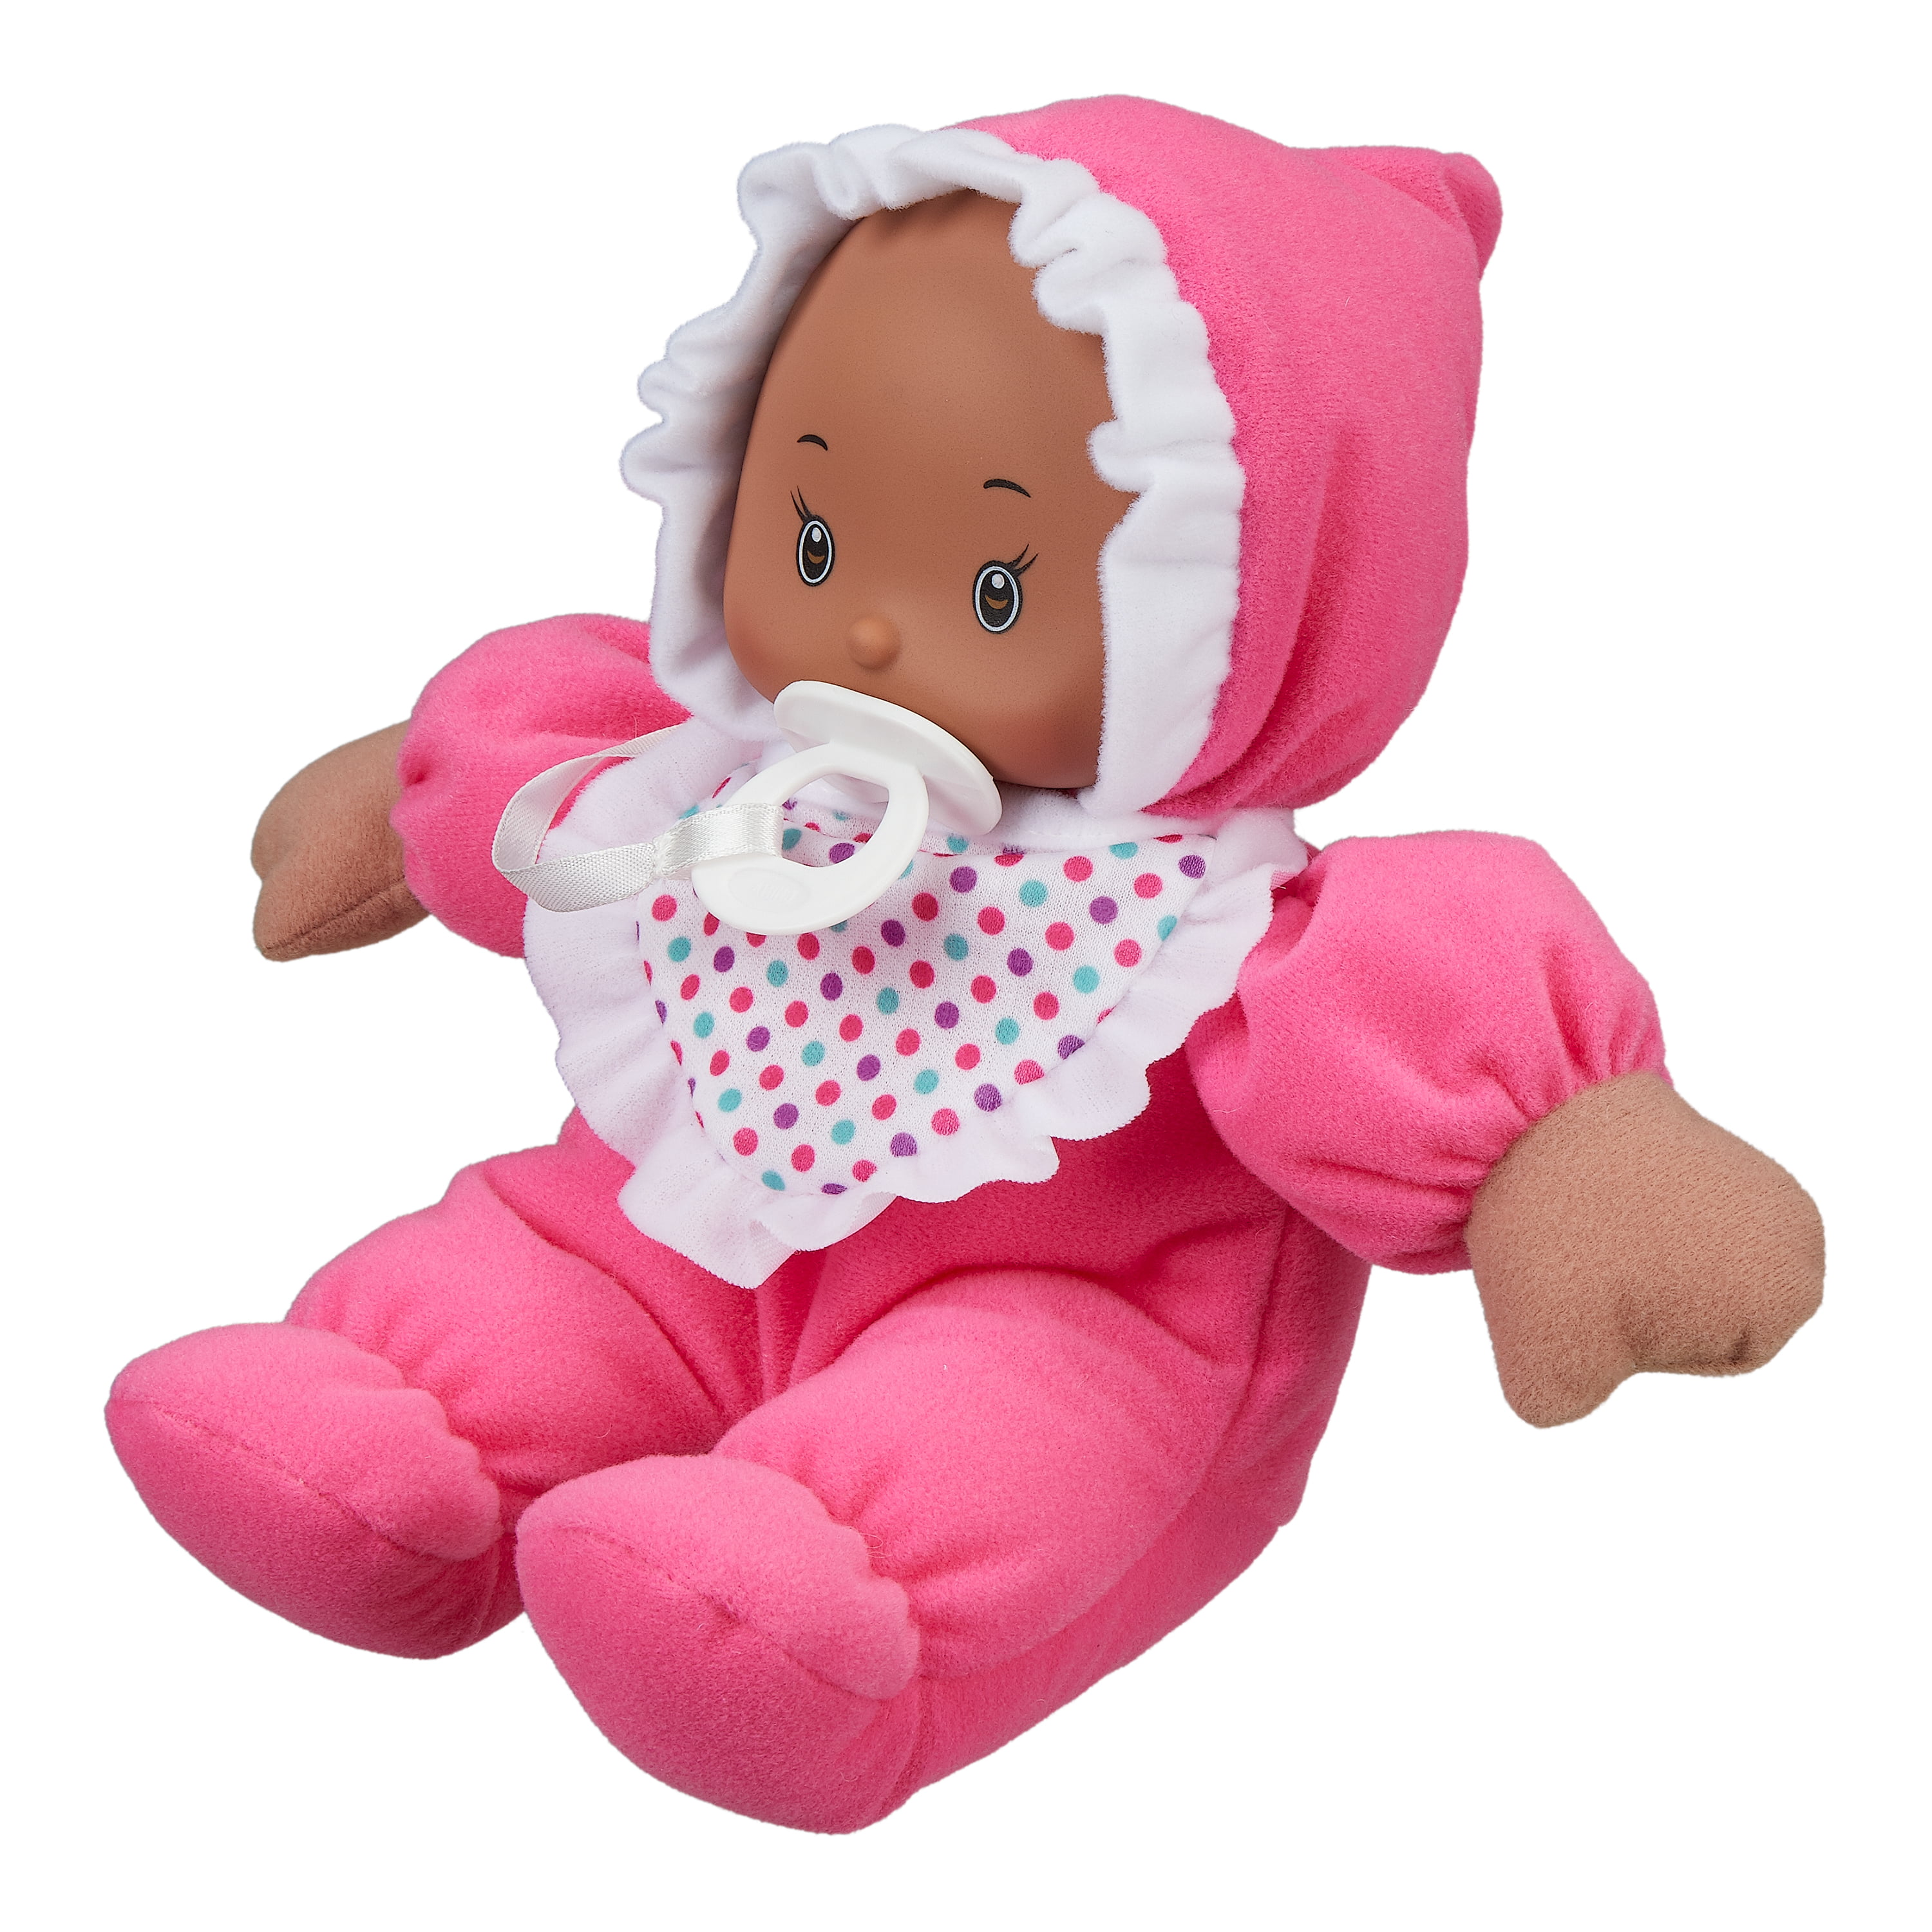 My Sweet Love African American Soft Baby Doll with Removable Bib and ...